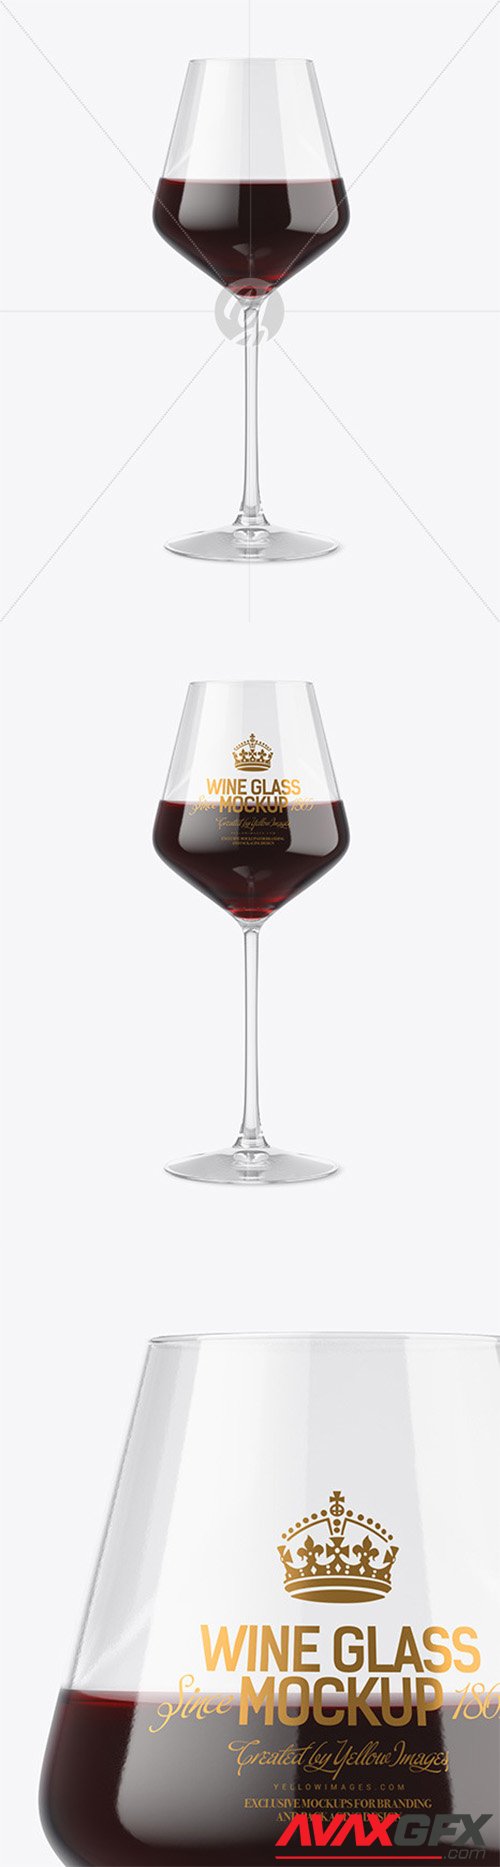 Download Red Wine Glass Mockup 51726 Avaxgfx All Downloads That You Need In One Place Graphic From Nitroflare Rapidgator Yellowimages Mockups